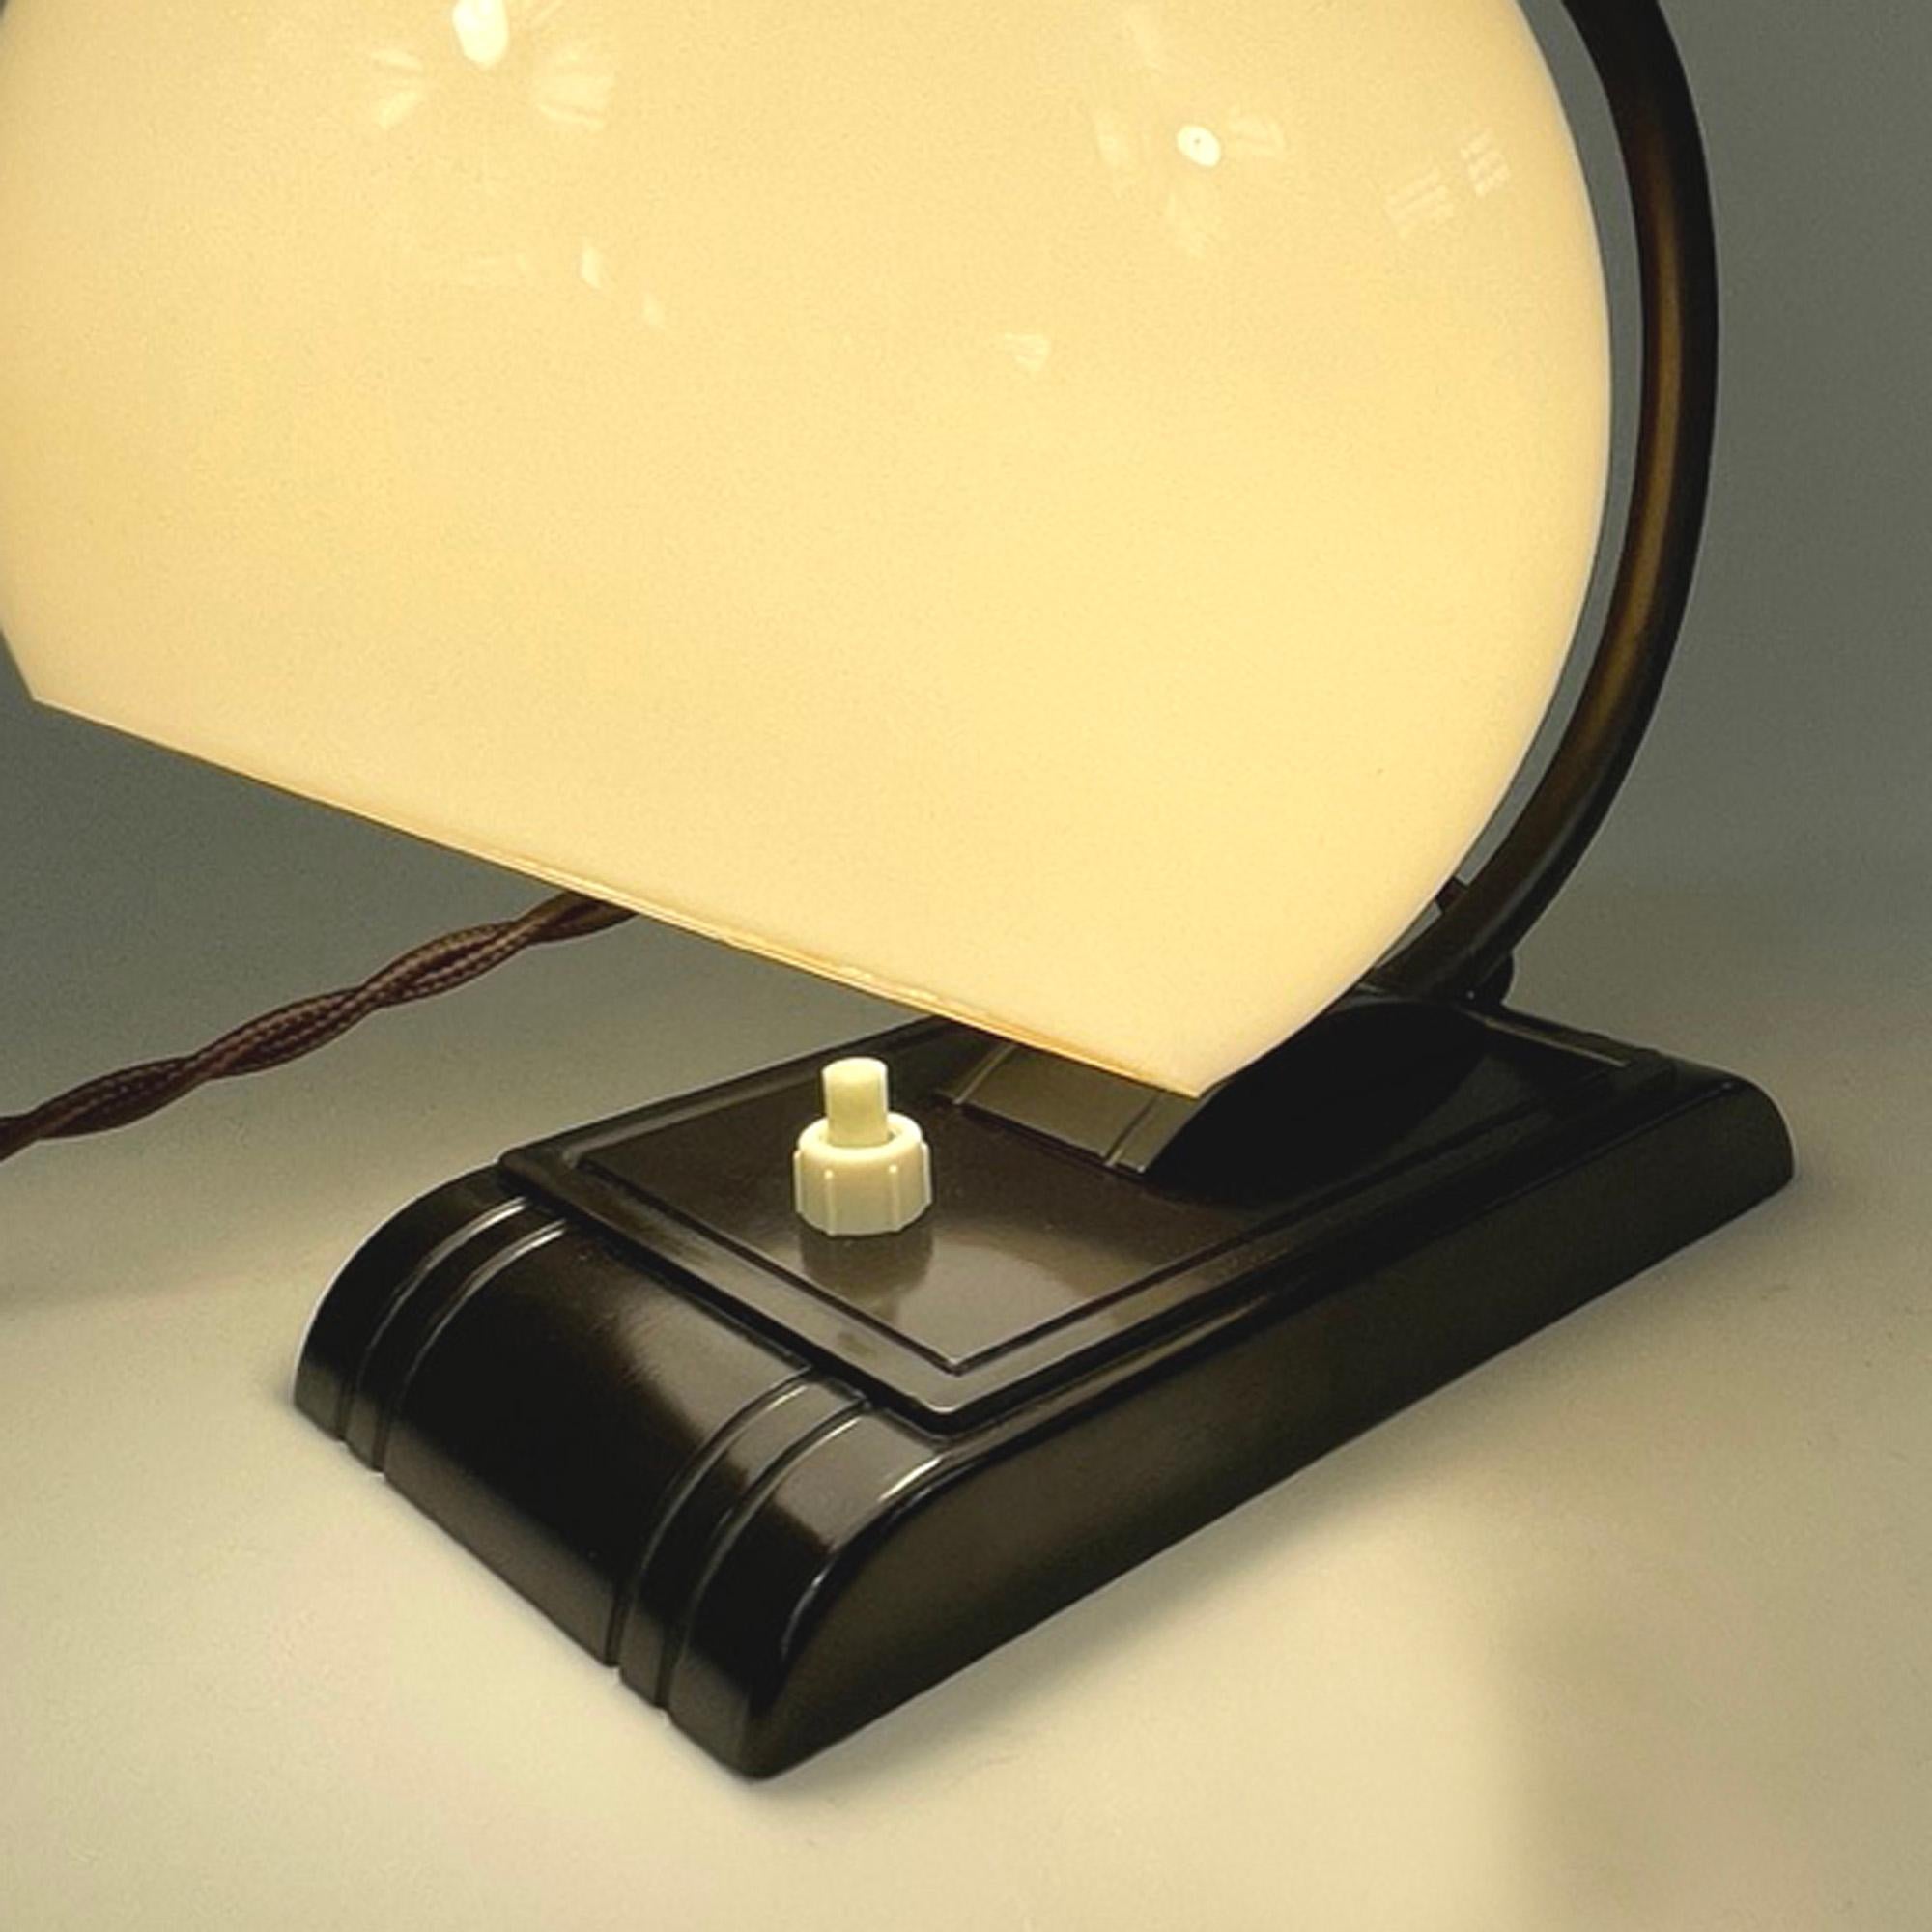 Art Deco Streamline Design Bakelite and Opaline Table Lamp, 1920s to 1930s For Sale 2